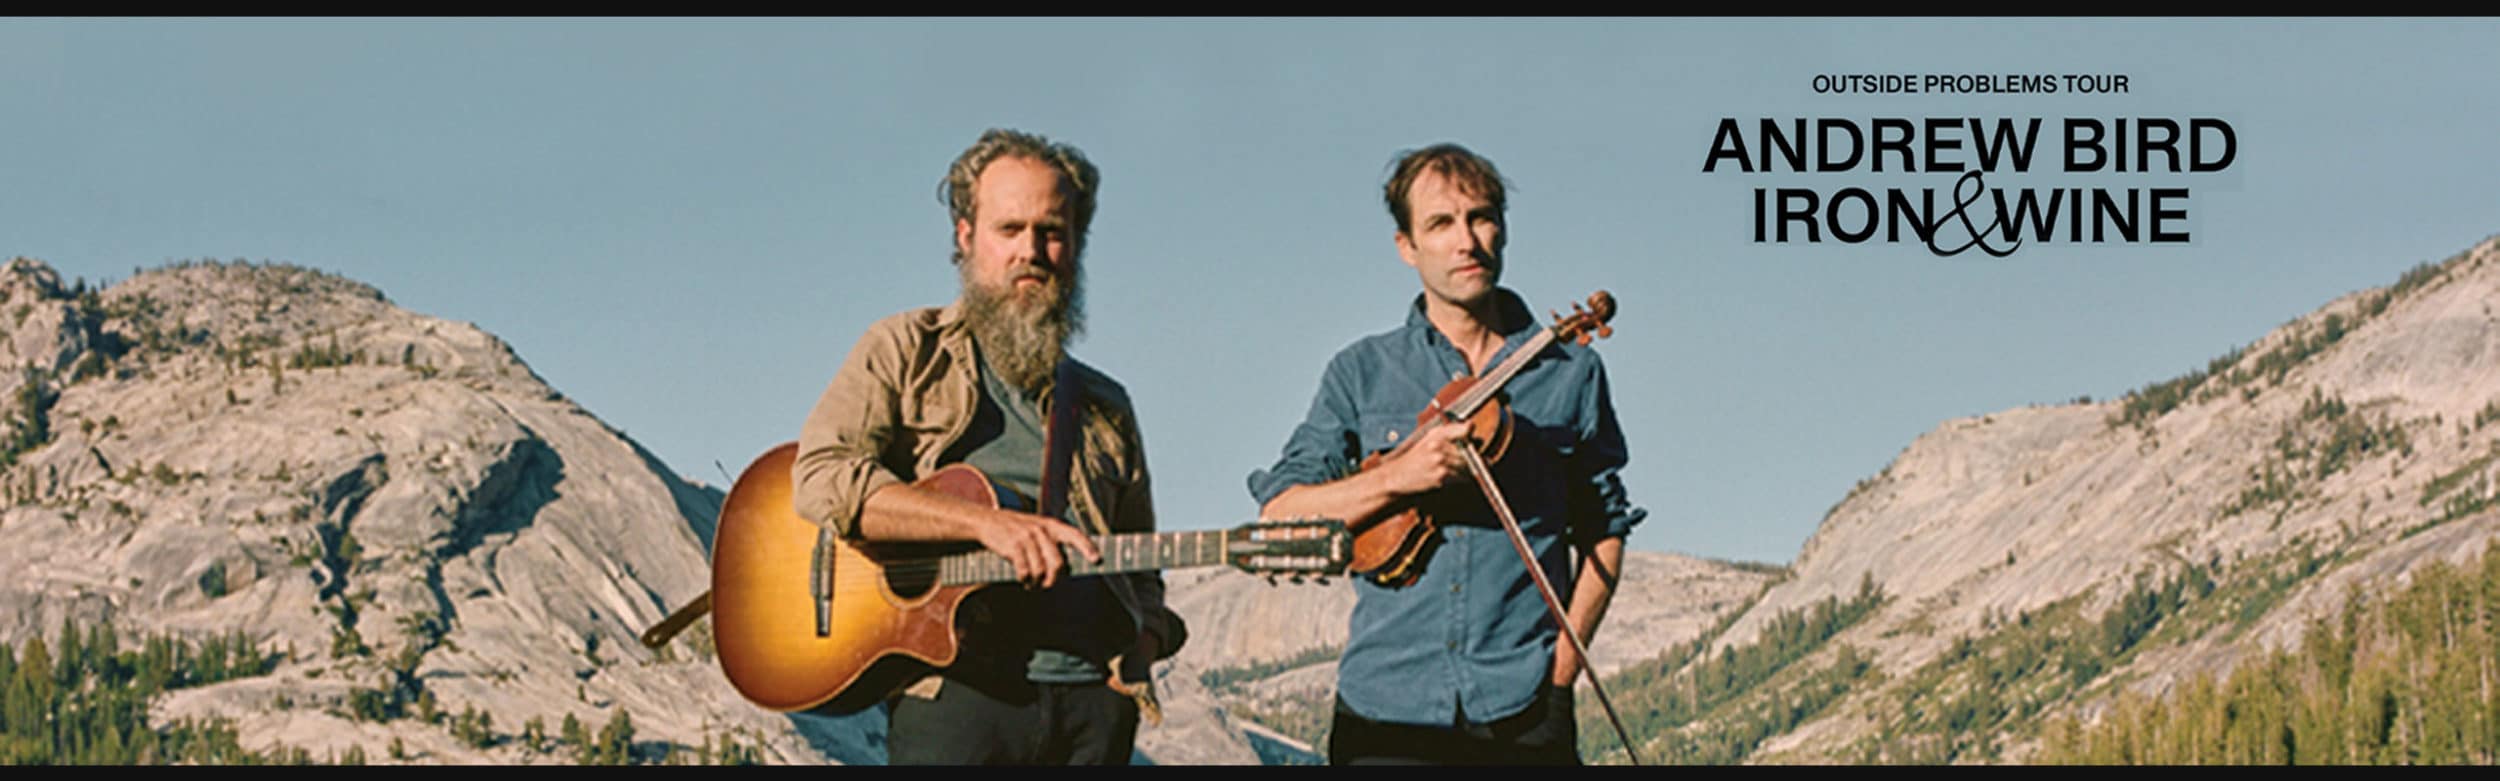 Andrew Bird and Iron & Wine: Outside Problems Tour